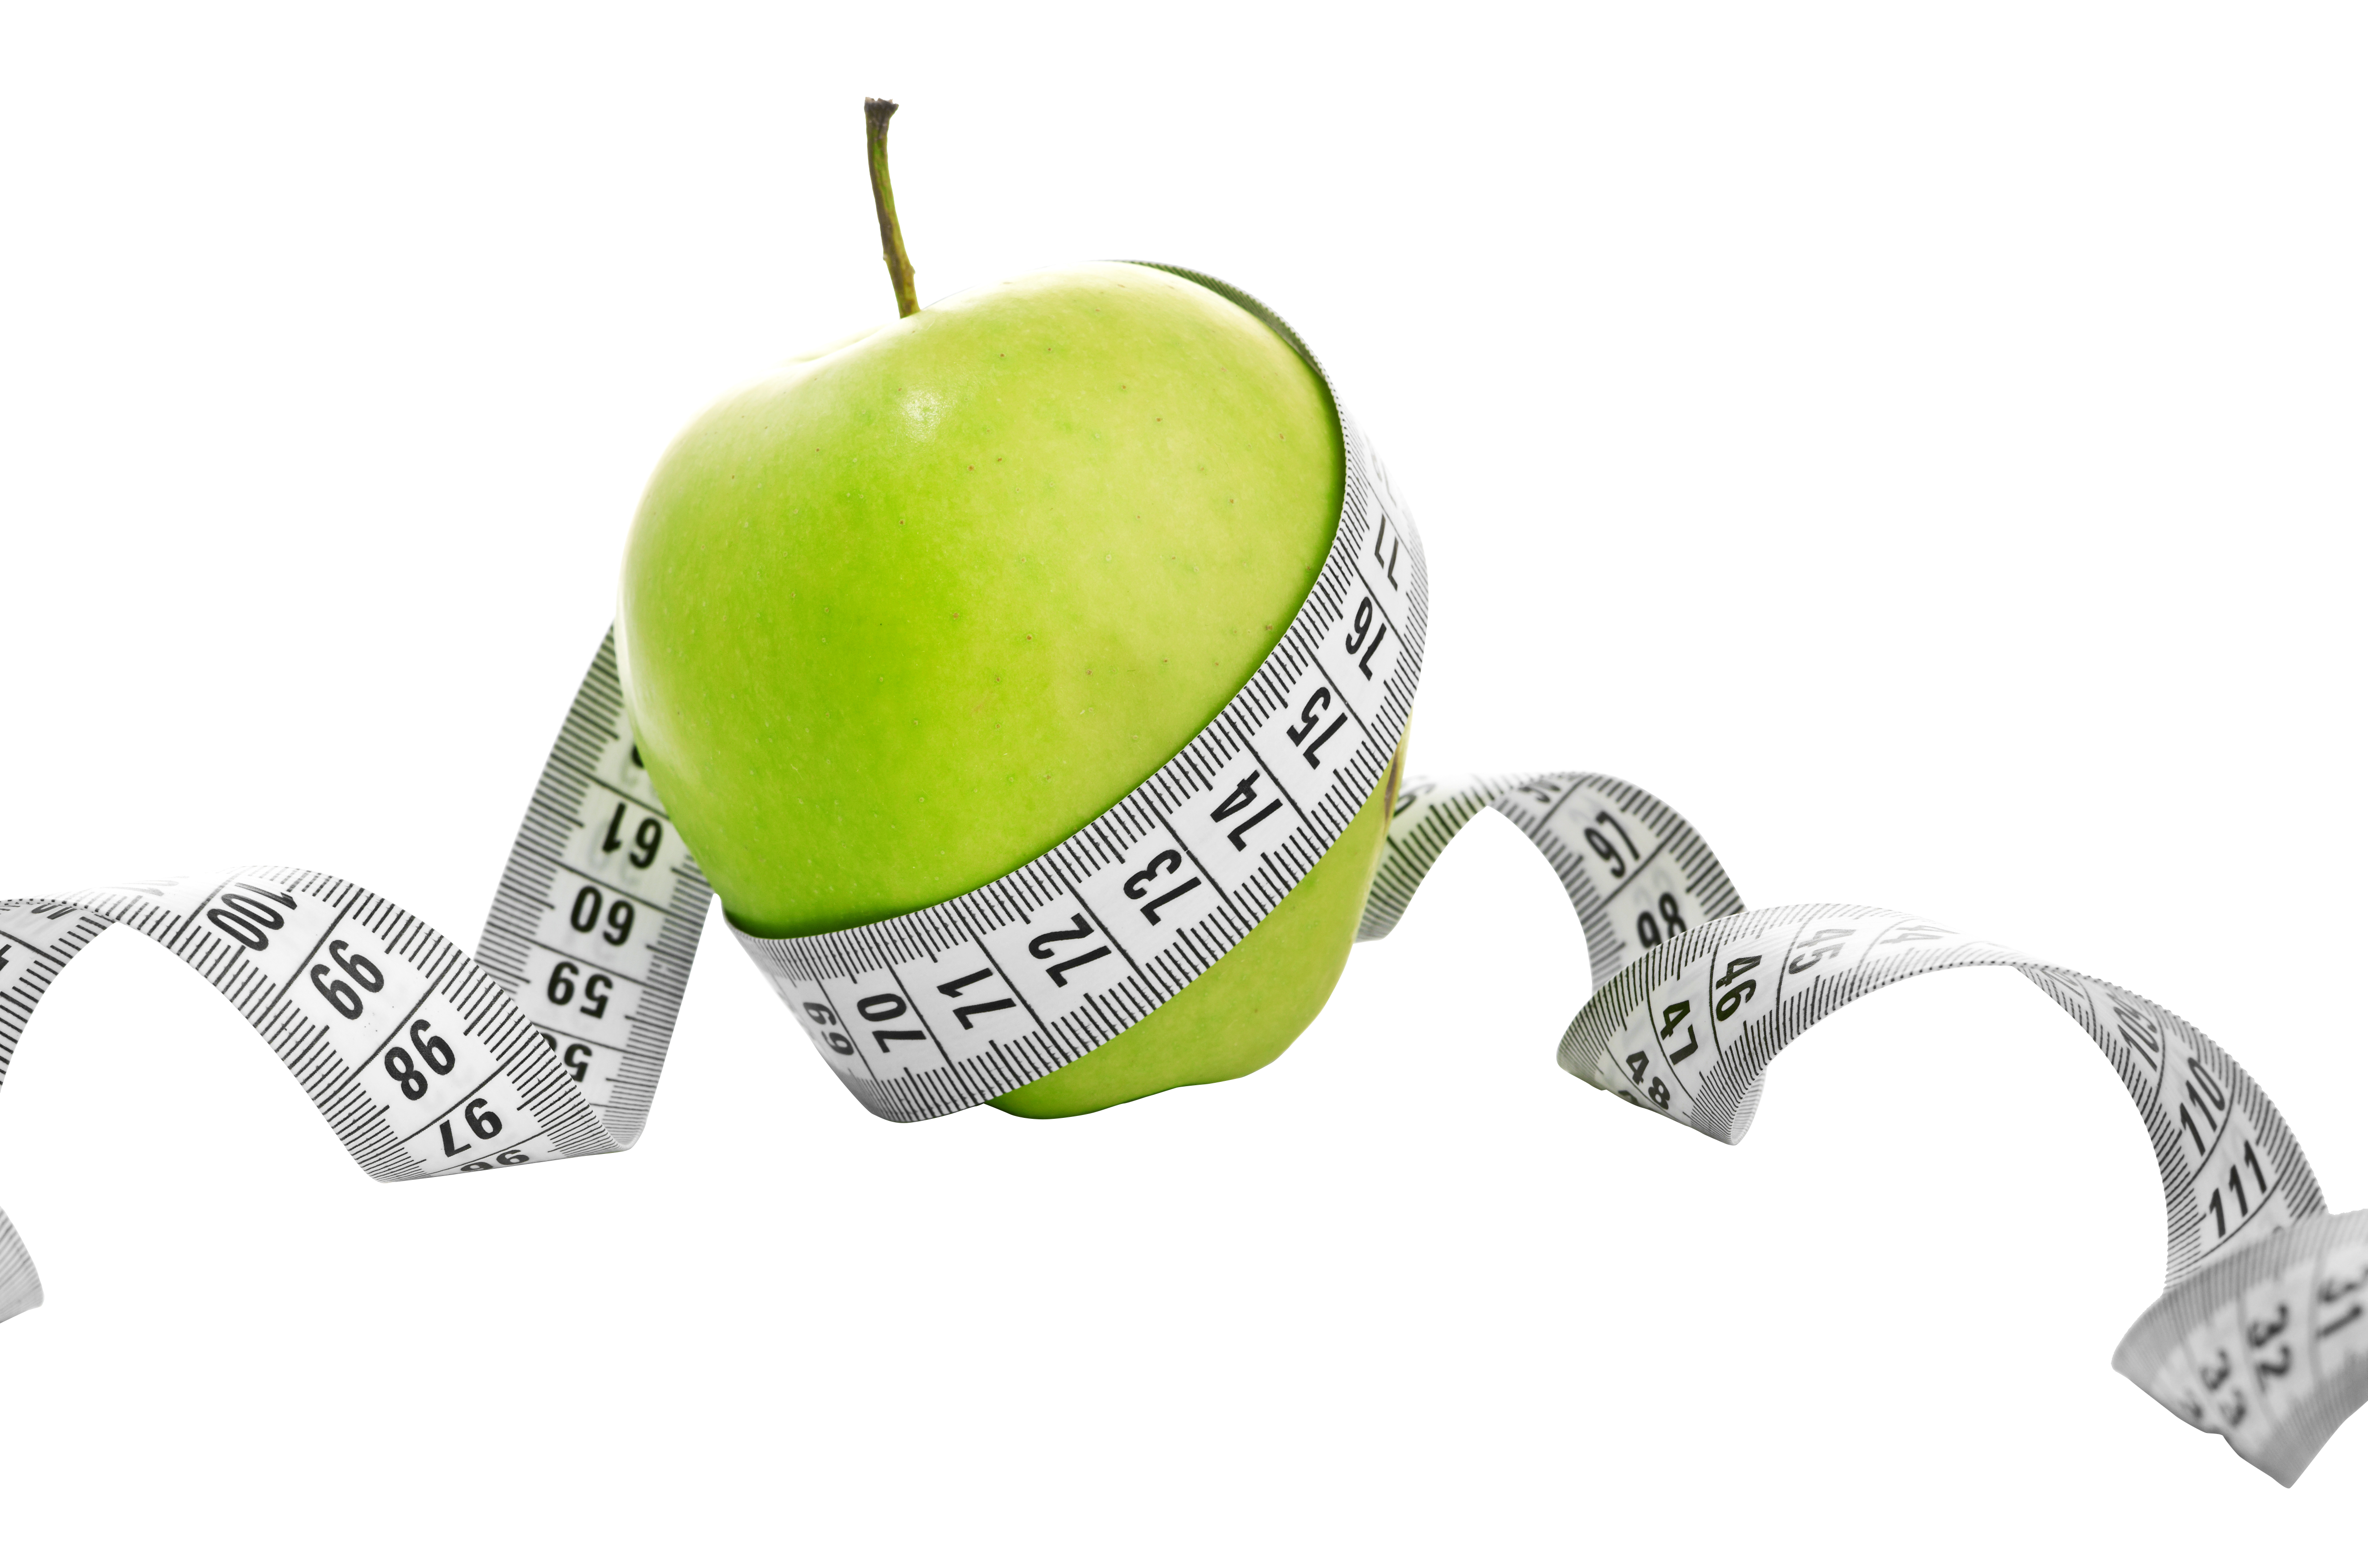 Download And Loss Management Apple Weight Wellness Measure HQ PNG Image |  FreePNGImg